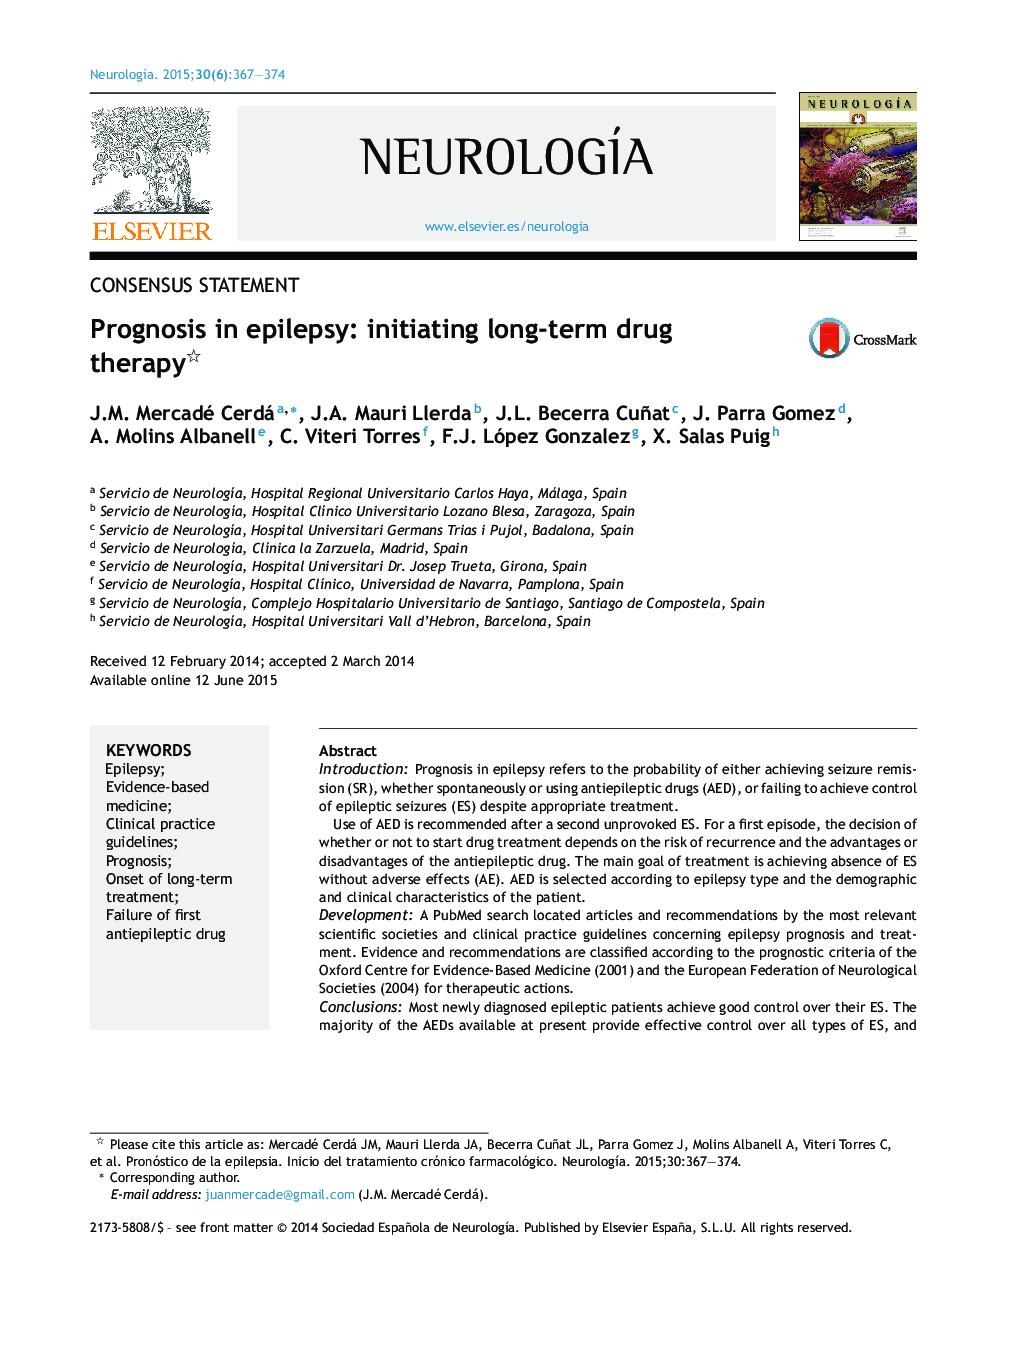 Prognosis in epilepsy: initiating long-term drug therapy 